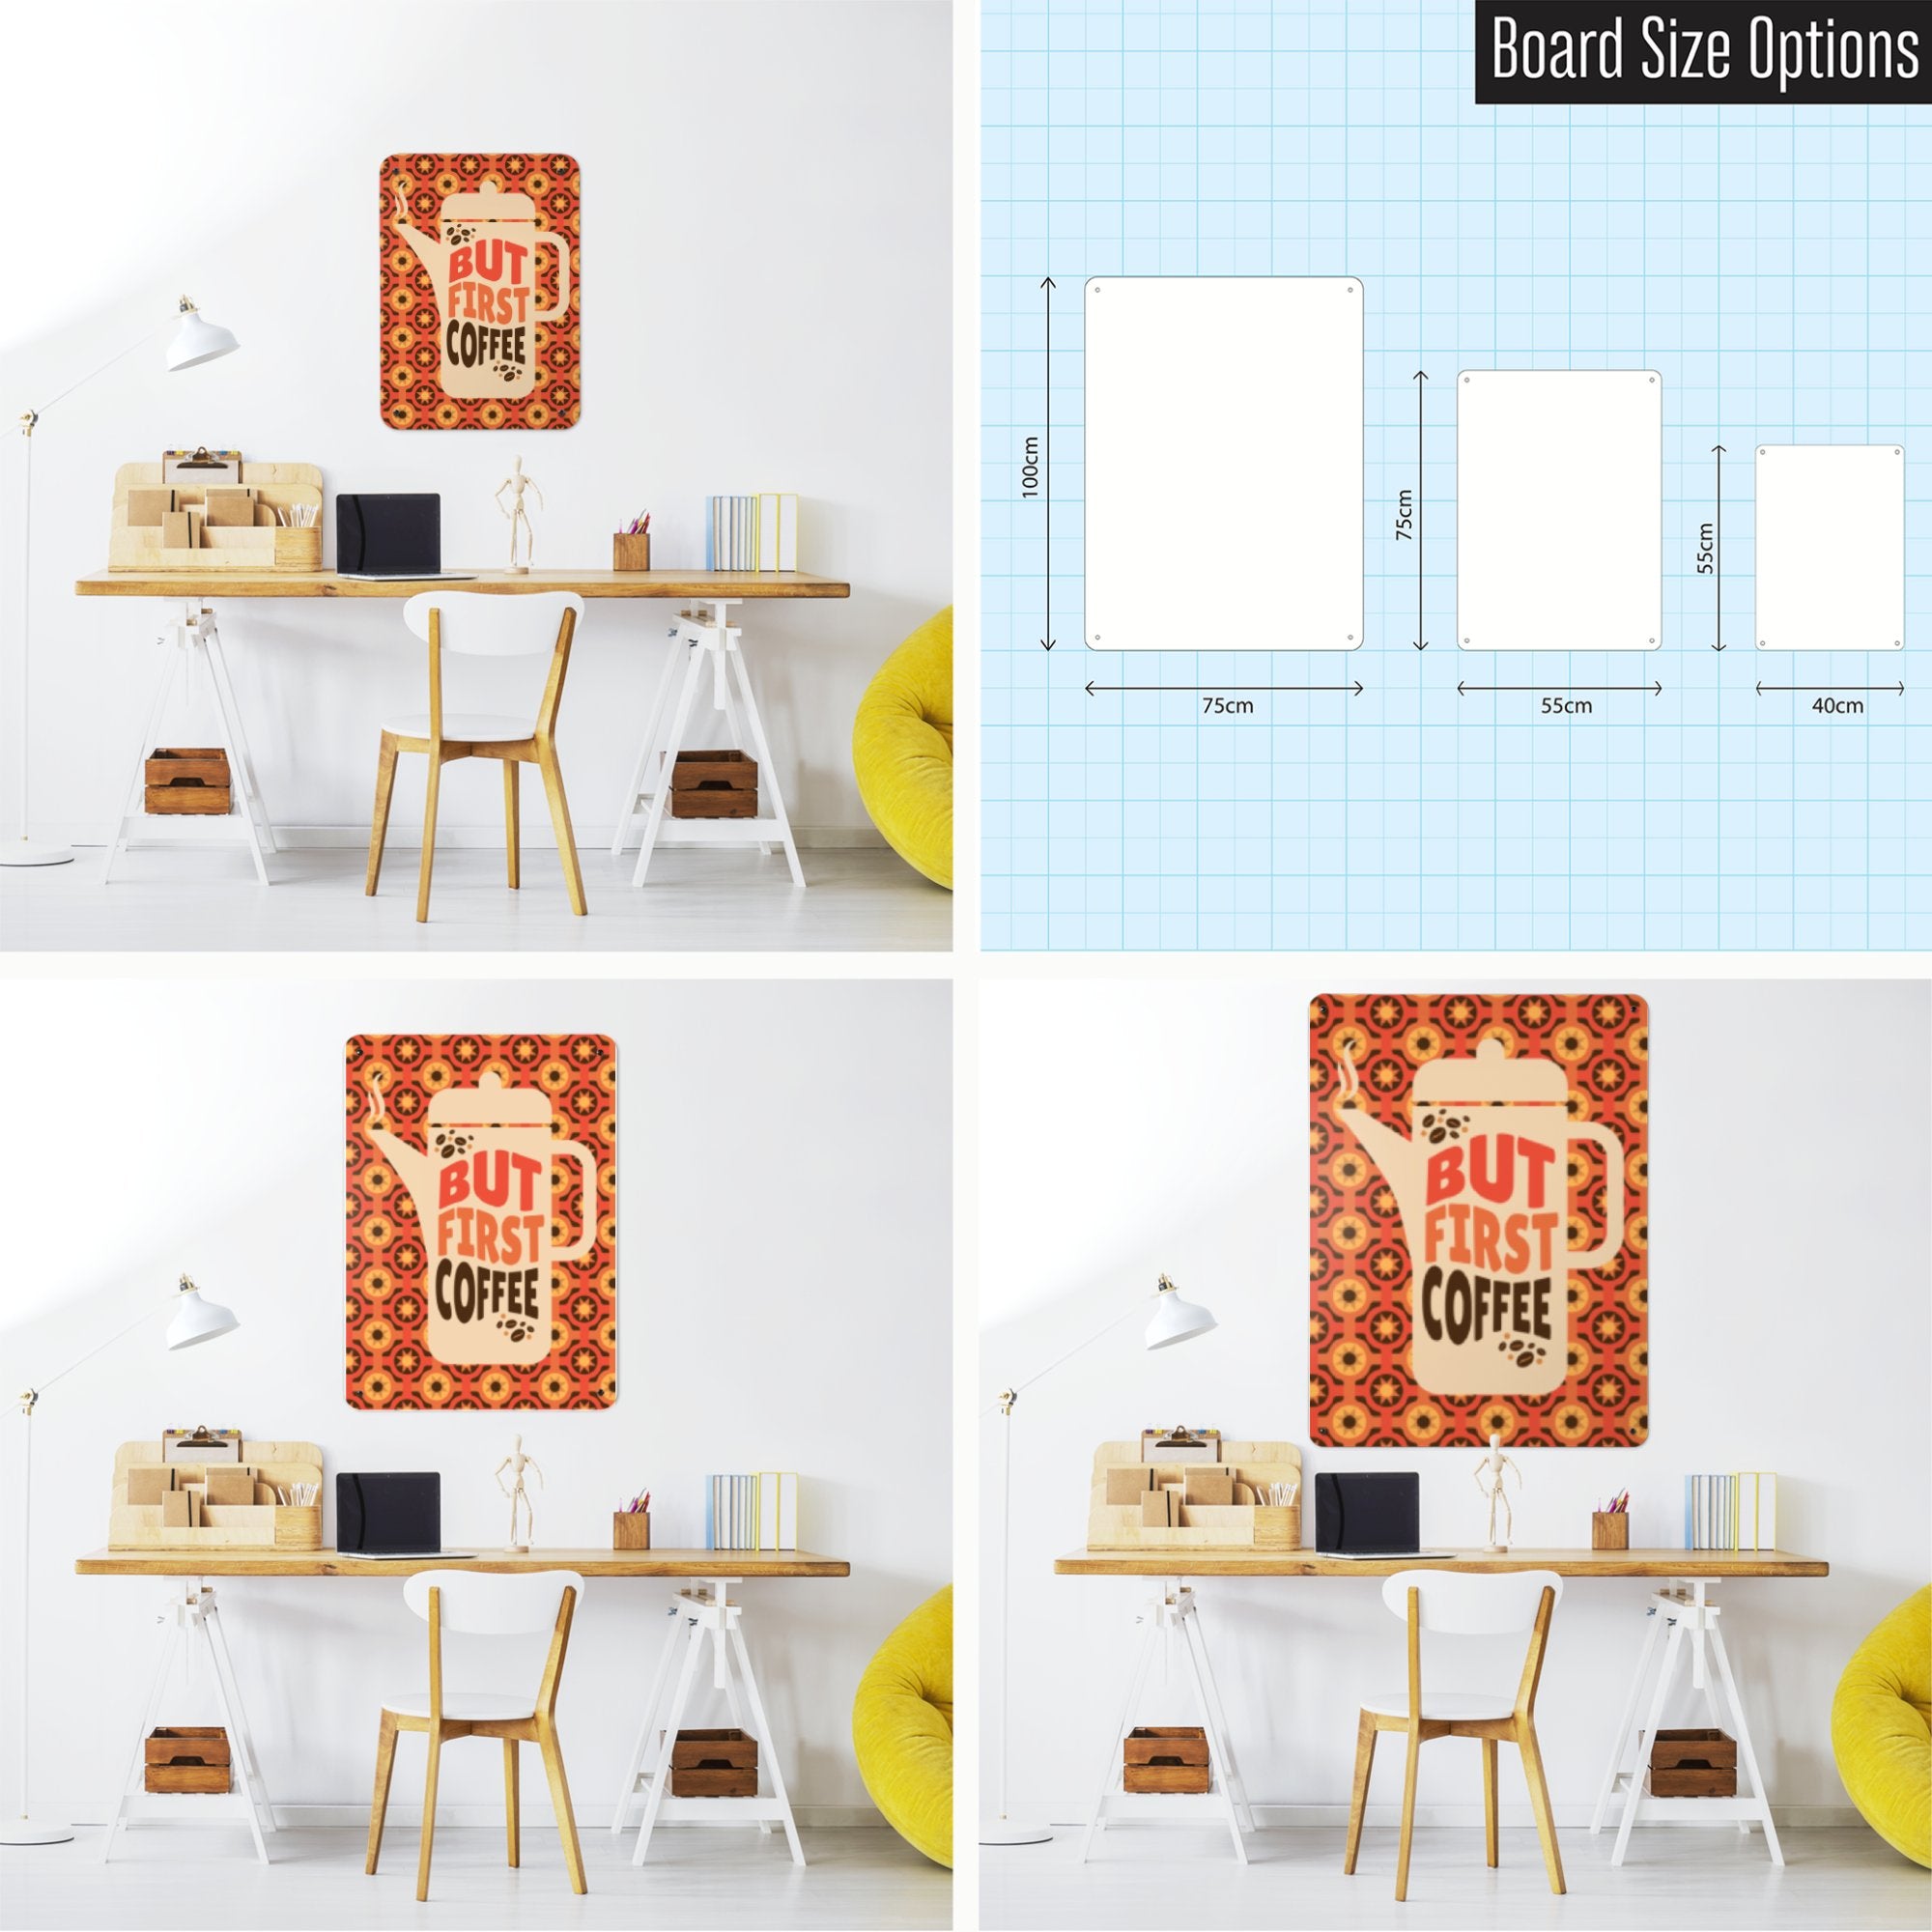 A large magnetic notice board showing a design of a  coffee pot with a quote that reads 'but first coffee' with a seventies style orange and brown pattern behind with a diagram and photos to show size options